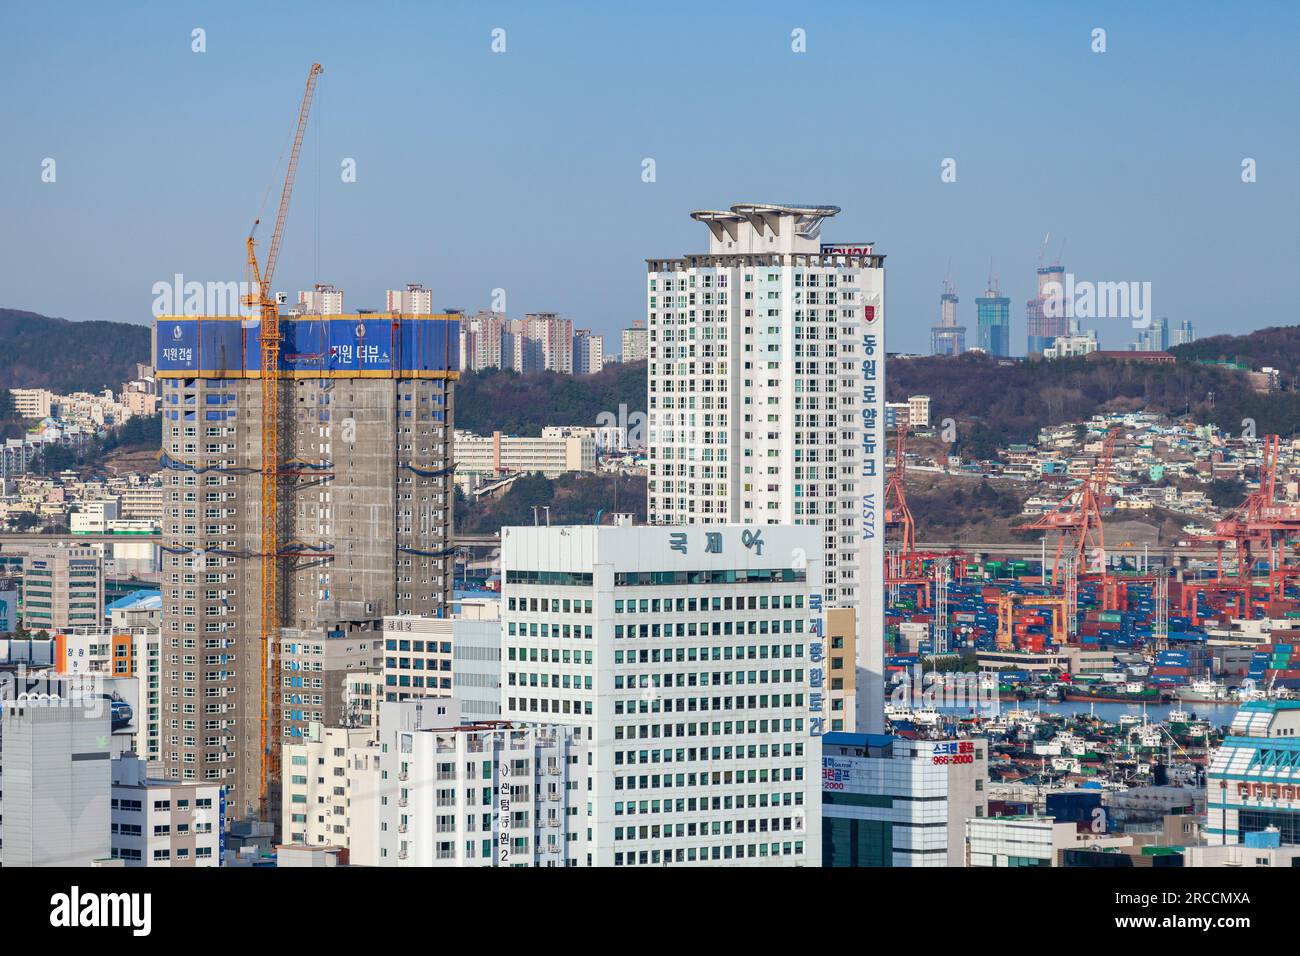 Busan, South Korea - March 22, 2018: Cityscape of Busan city with skyscraper under construction, aerial view Stock Photo